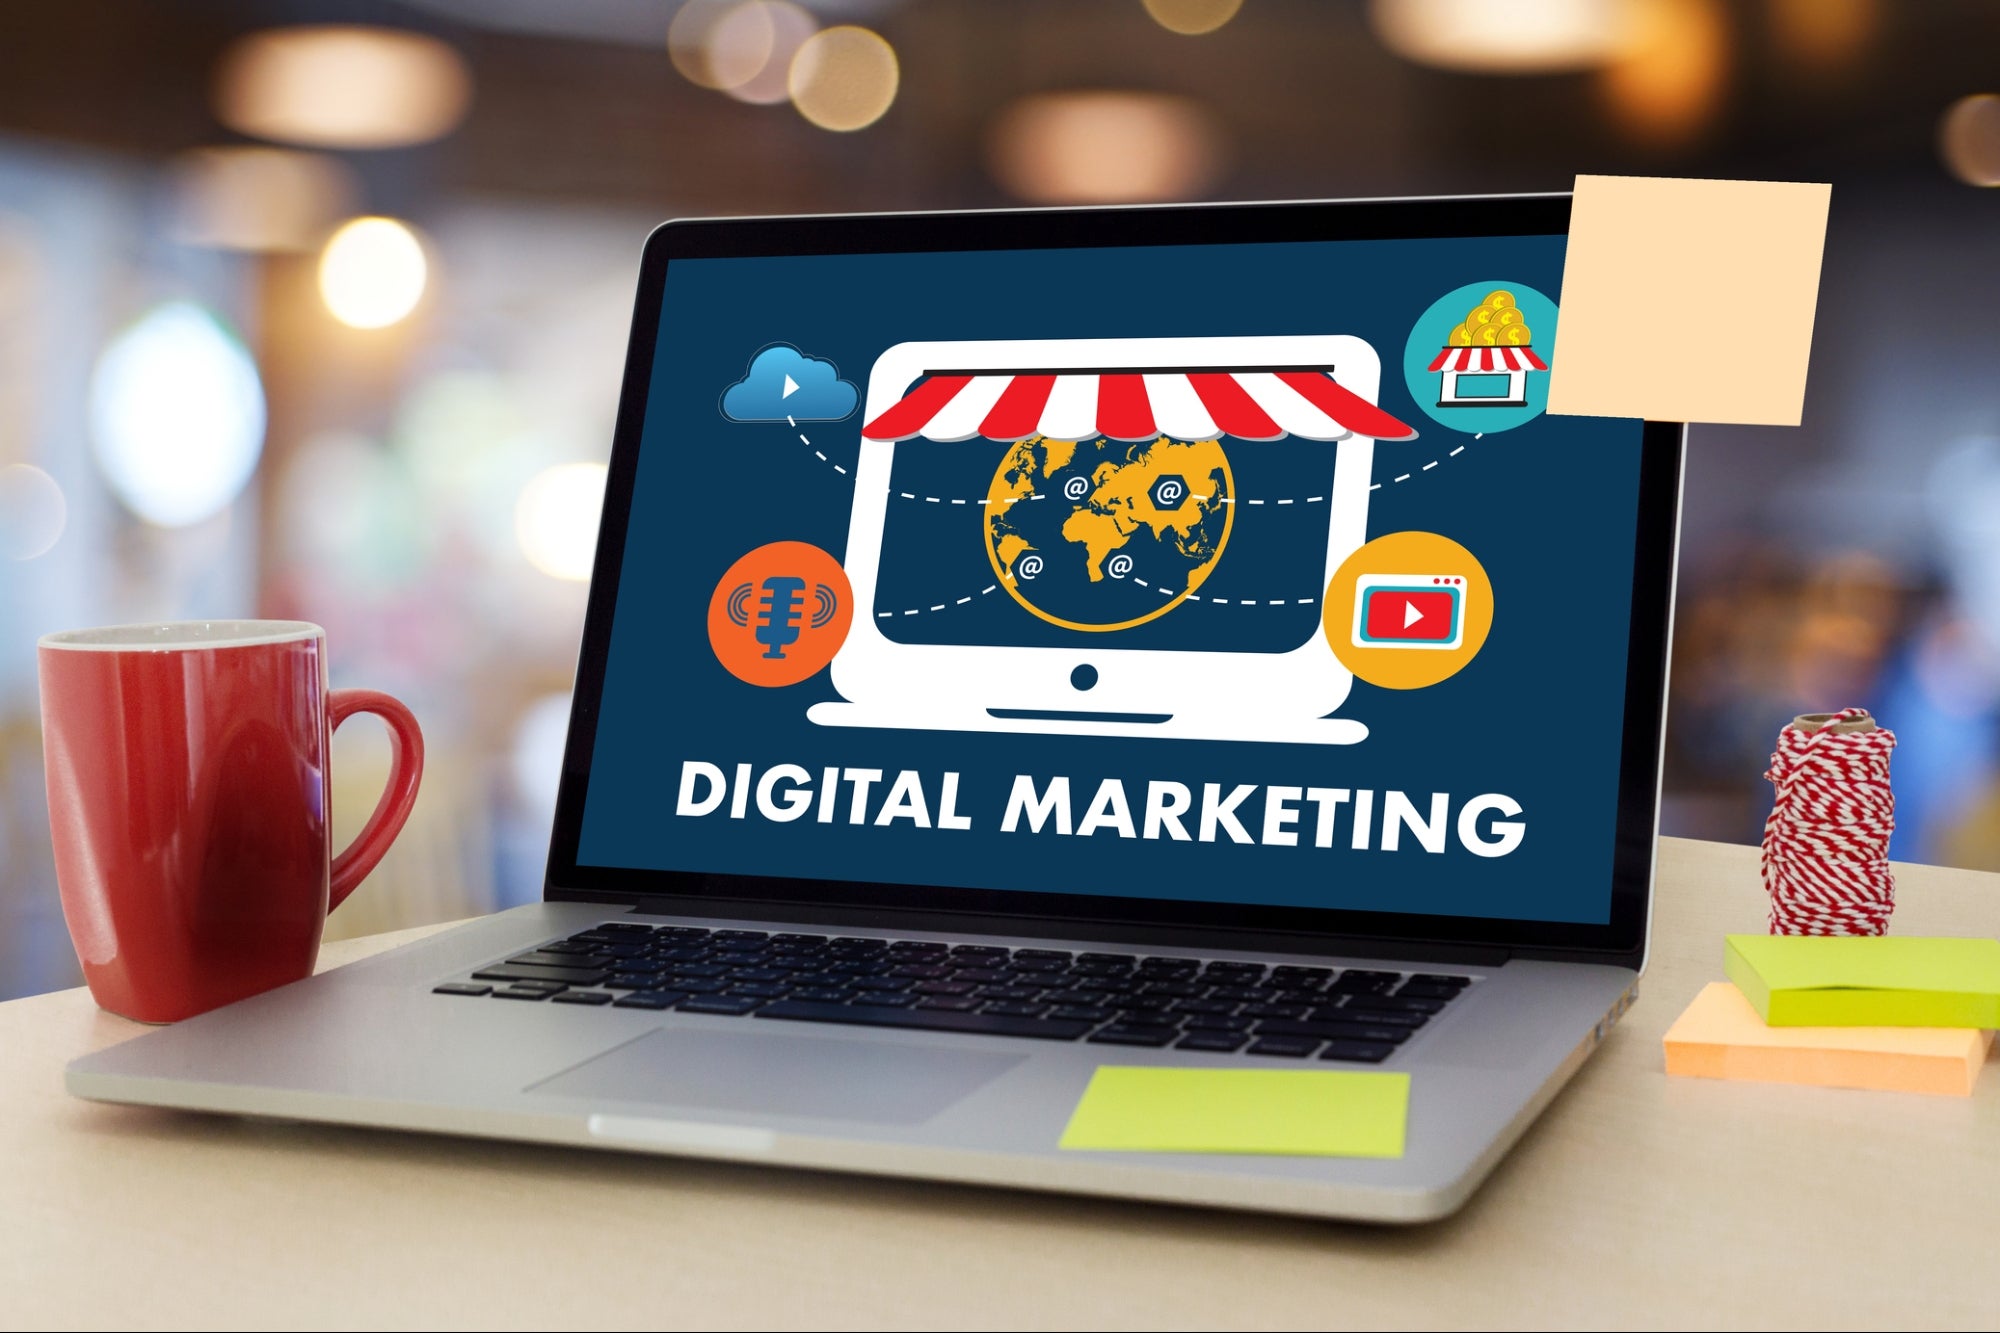 Digital Marketing is Important For Small Business